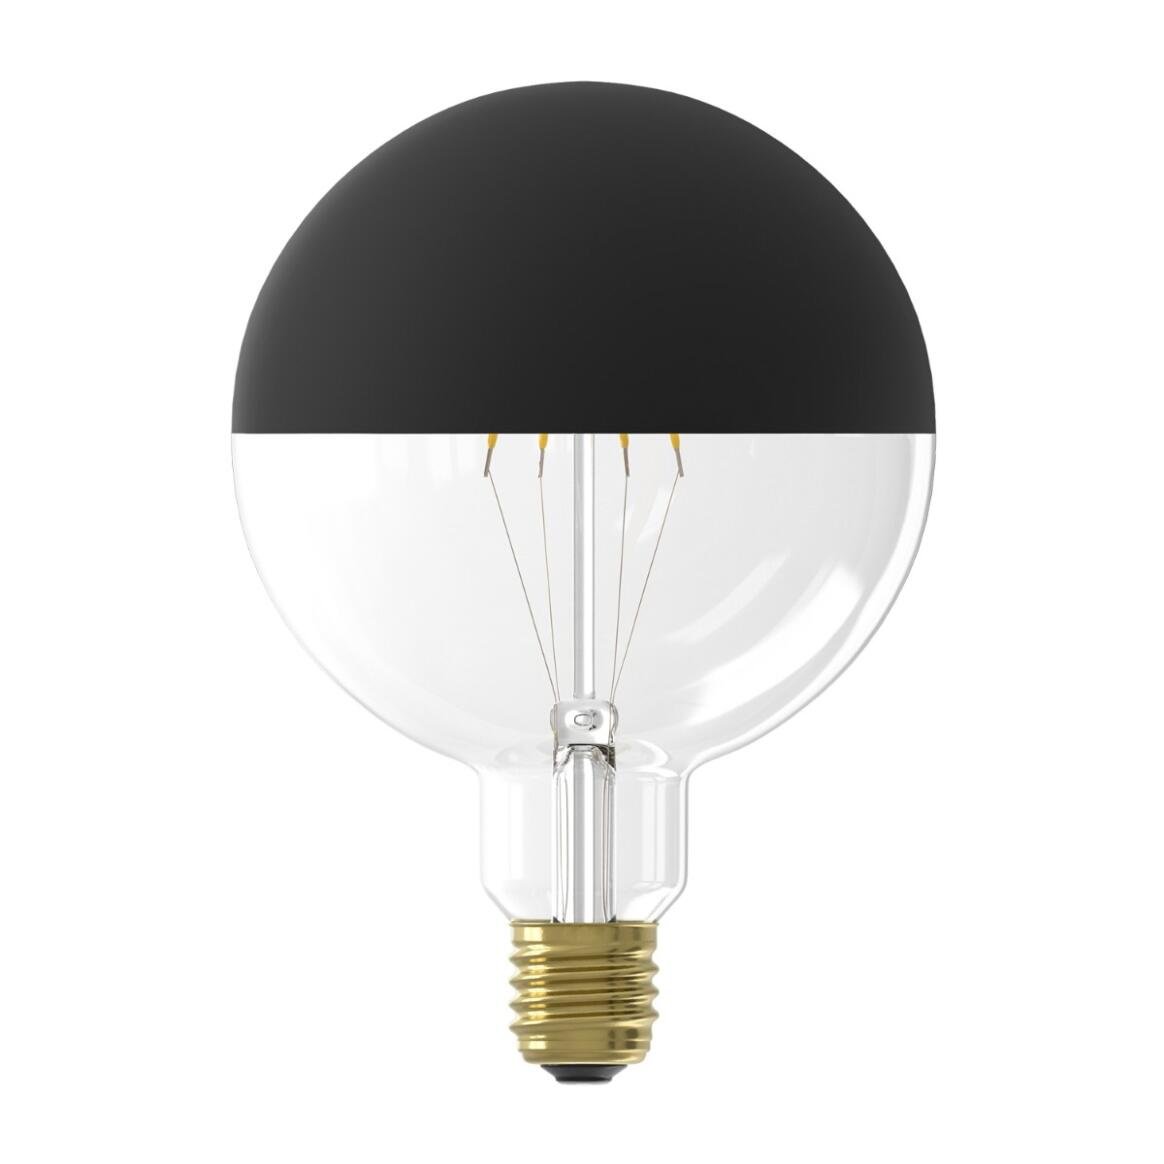 LED Filament Mirror Top Light Bulb Black Dimmable E27 4W 2000k 190lm 12.5cm main product image